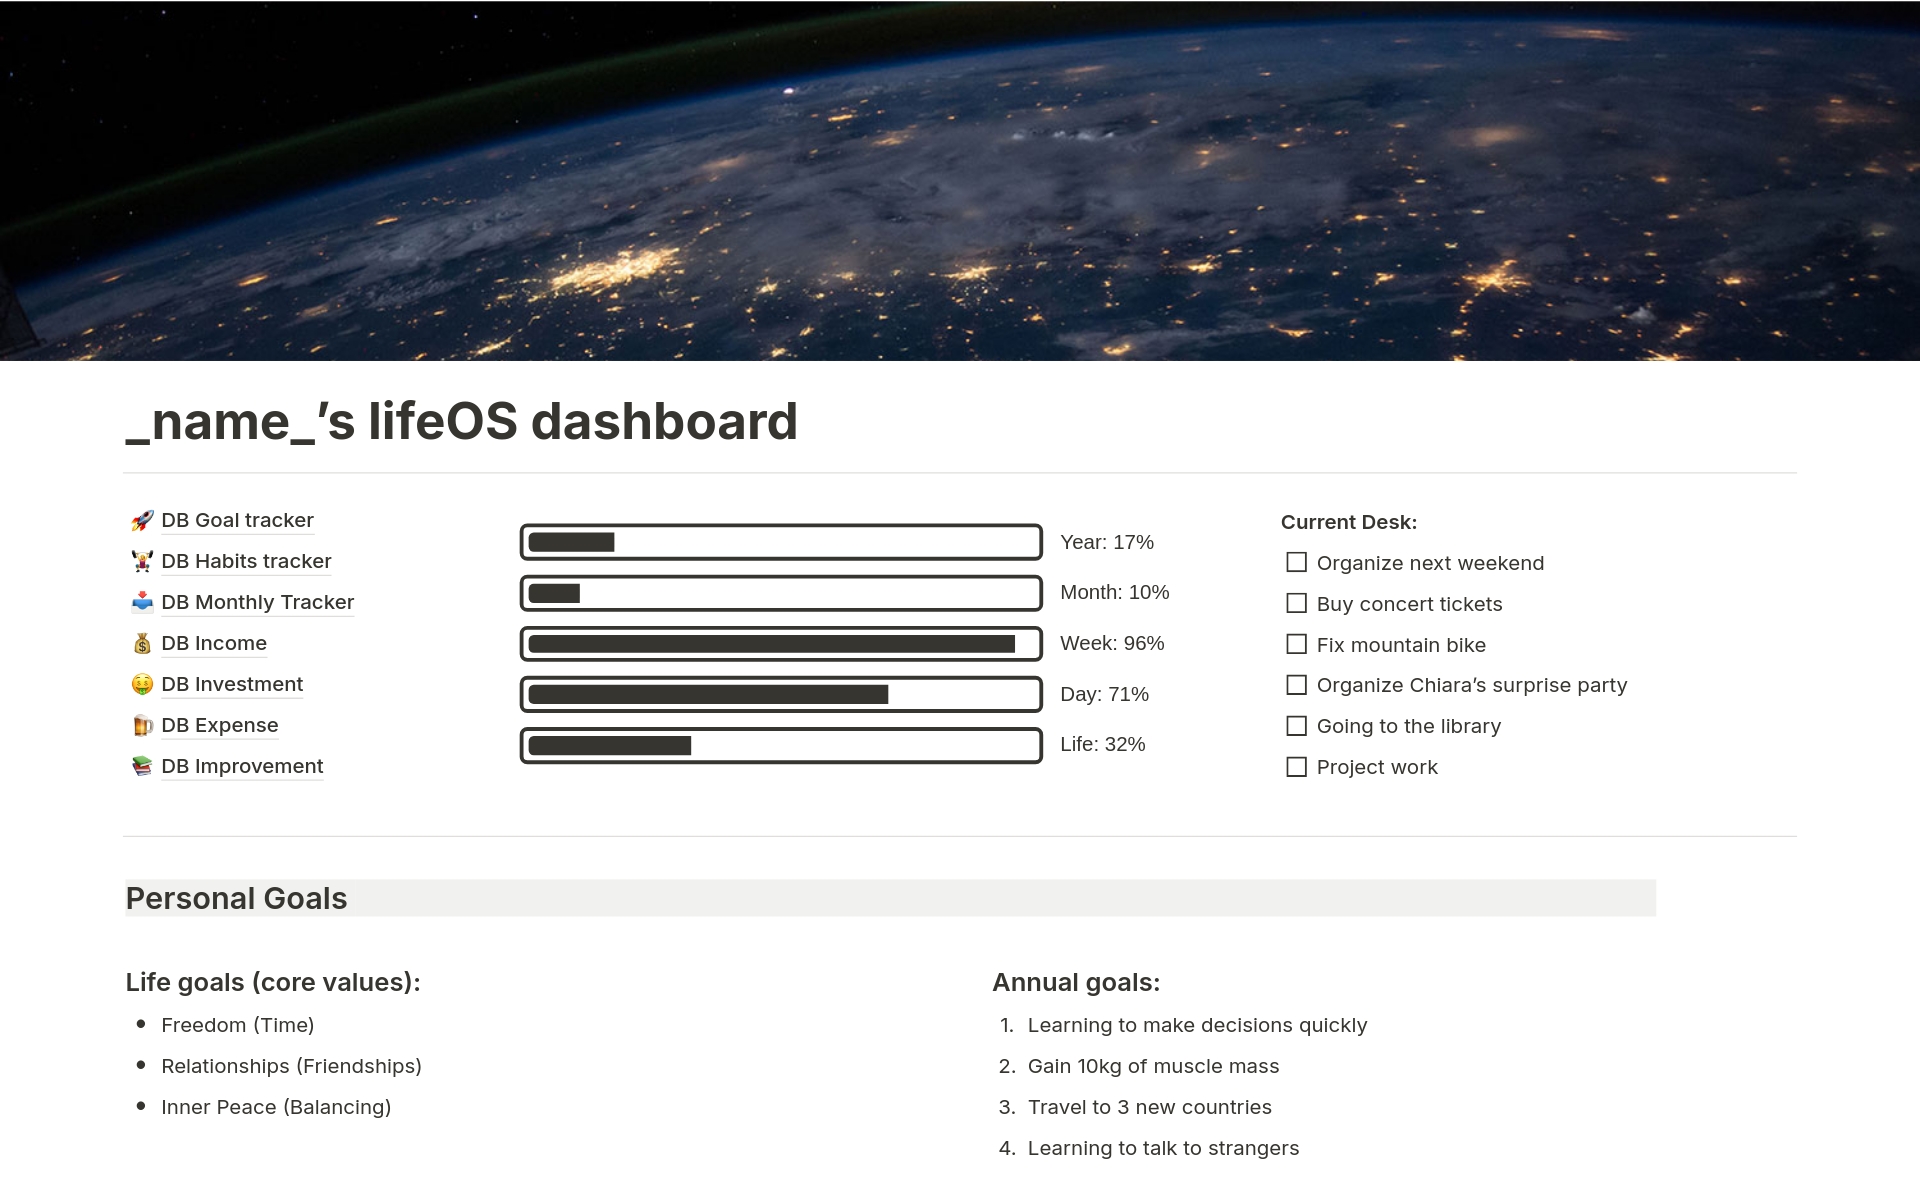 A personal dashboard to better manage our lives that includes personal goals, personal finance and self-improvement.